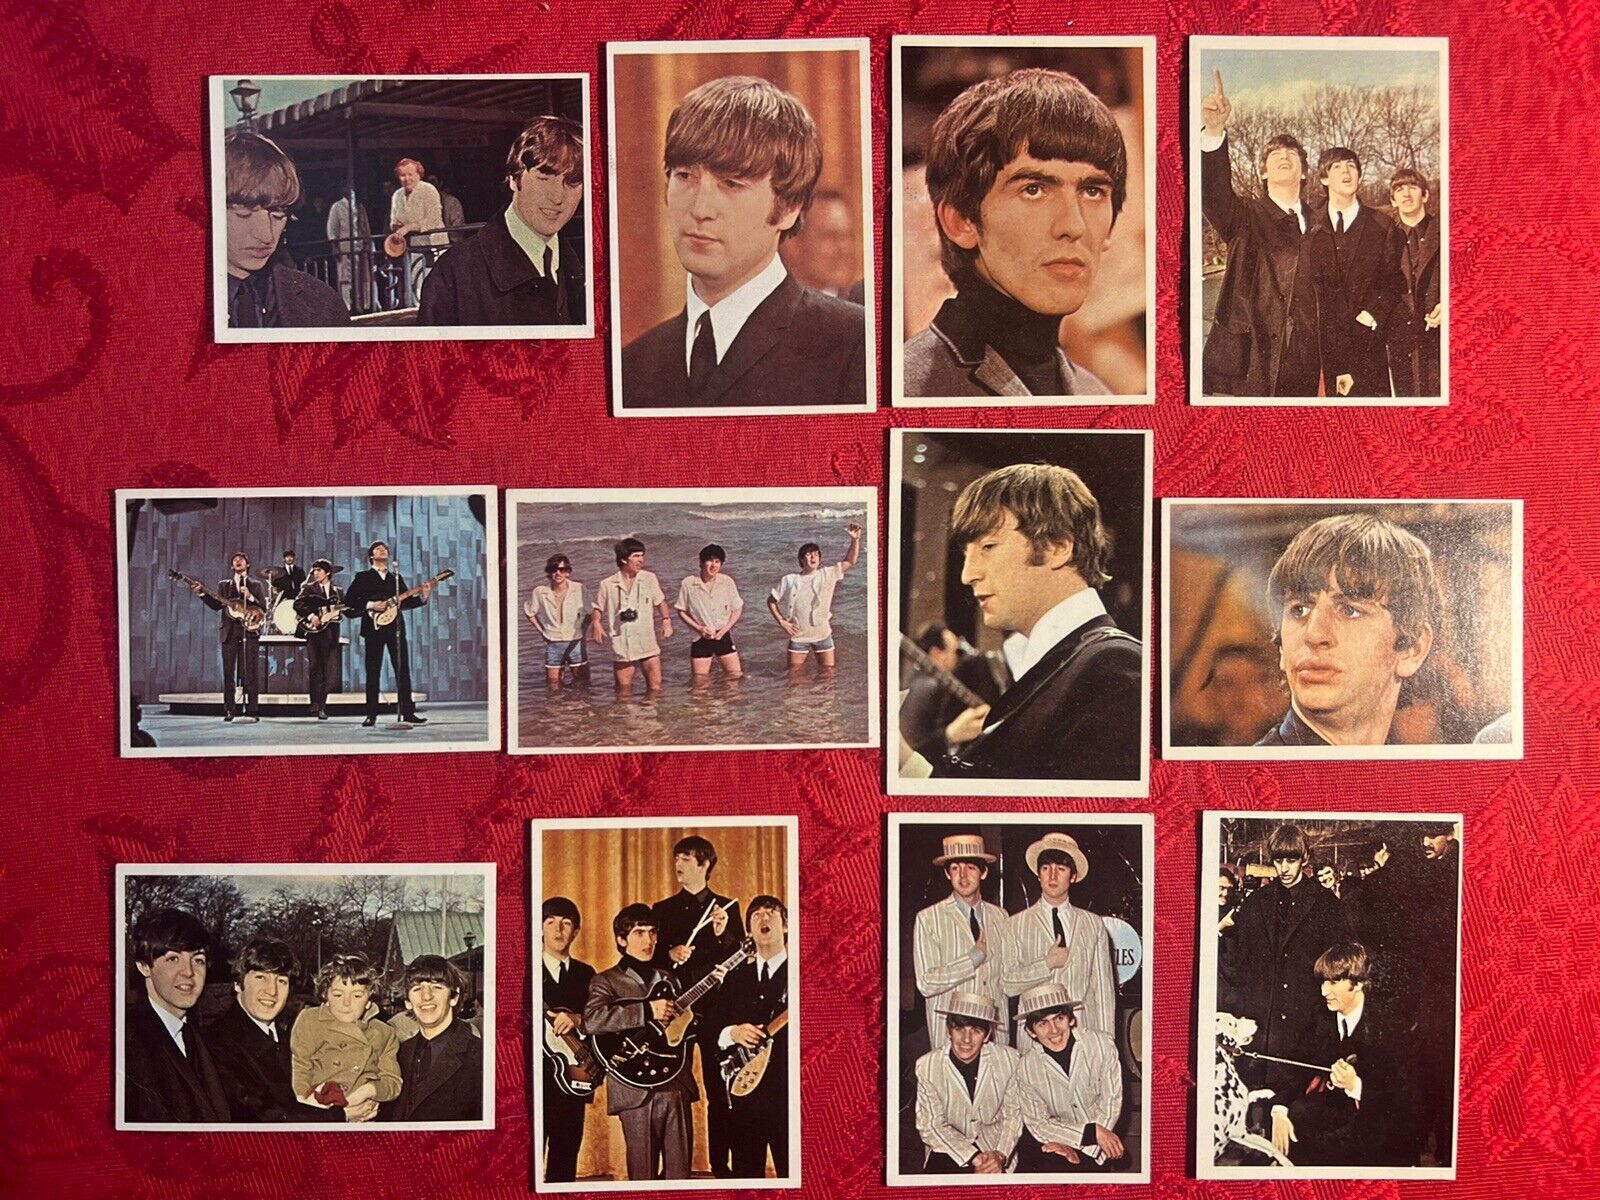 1964 TOPPS USA-BEATLES-COLOR CARDS-12 CARD PART SET/LOT-SEE THE PHOTOS-EXCELLENT